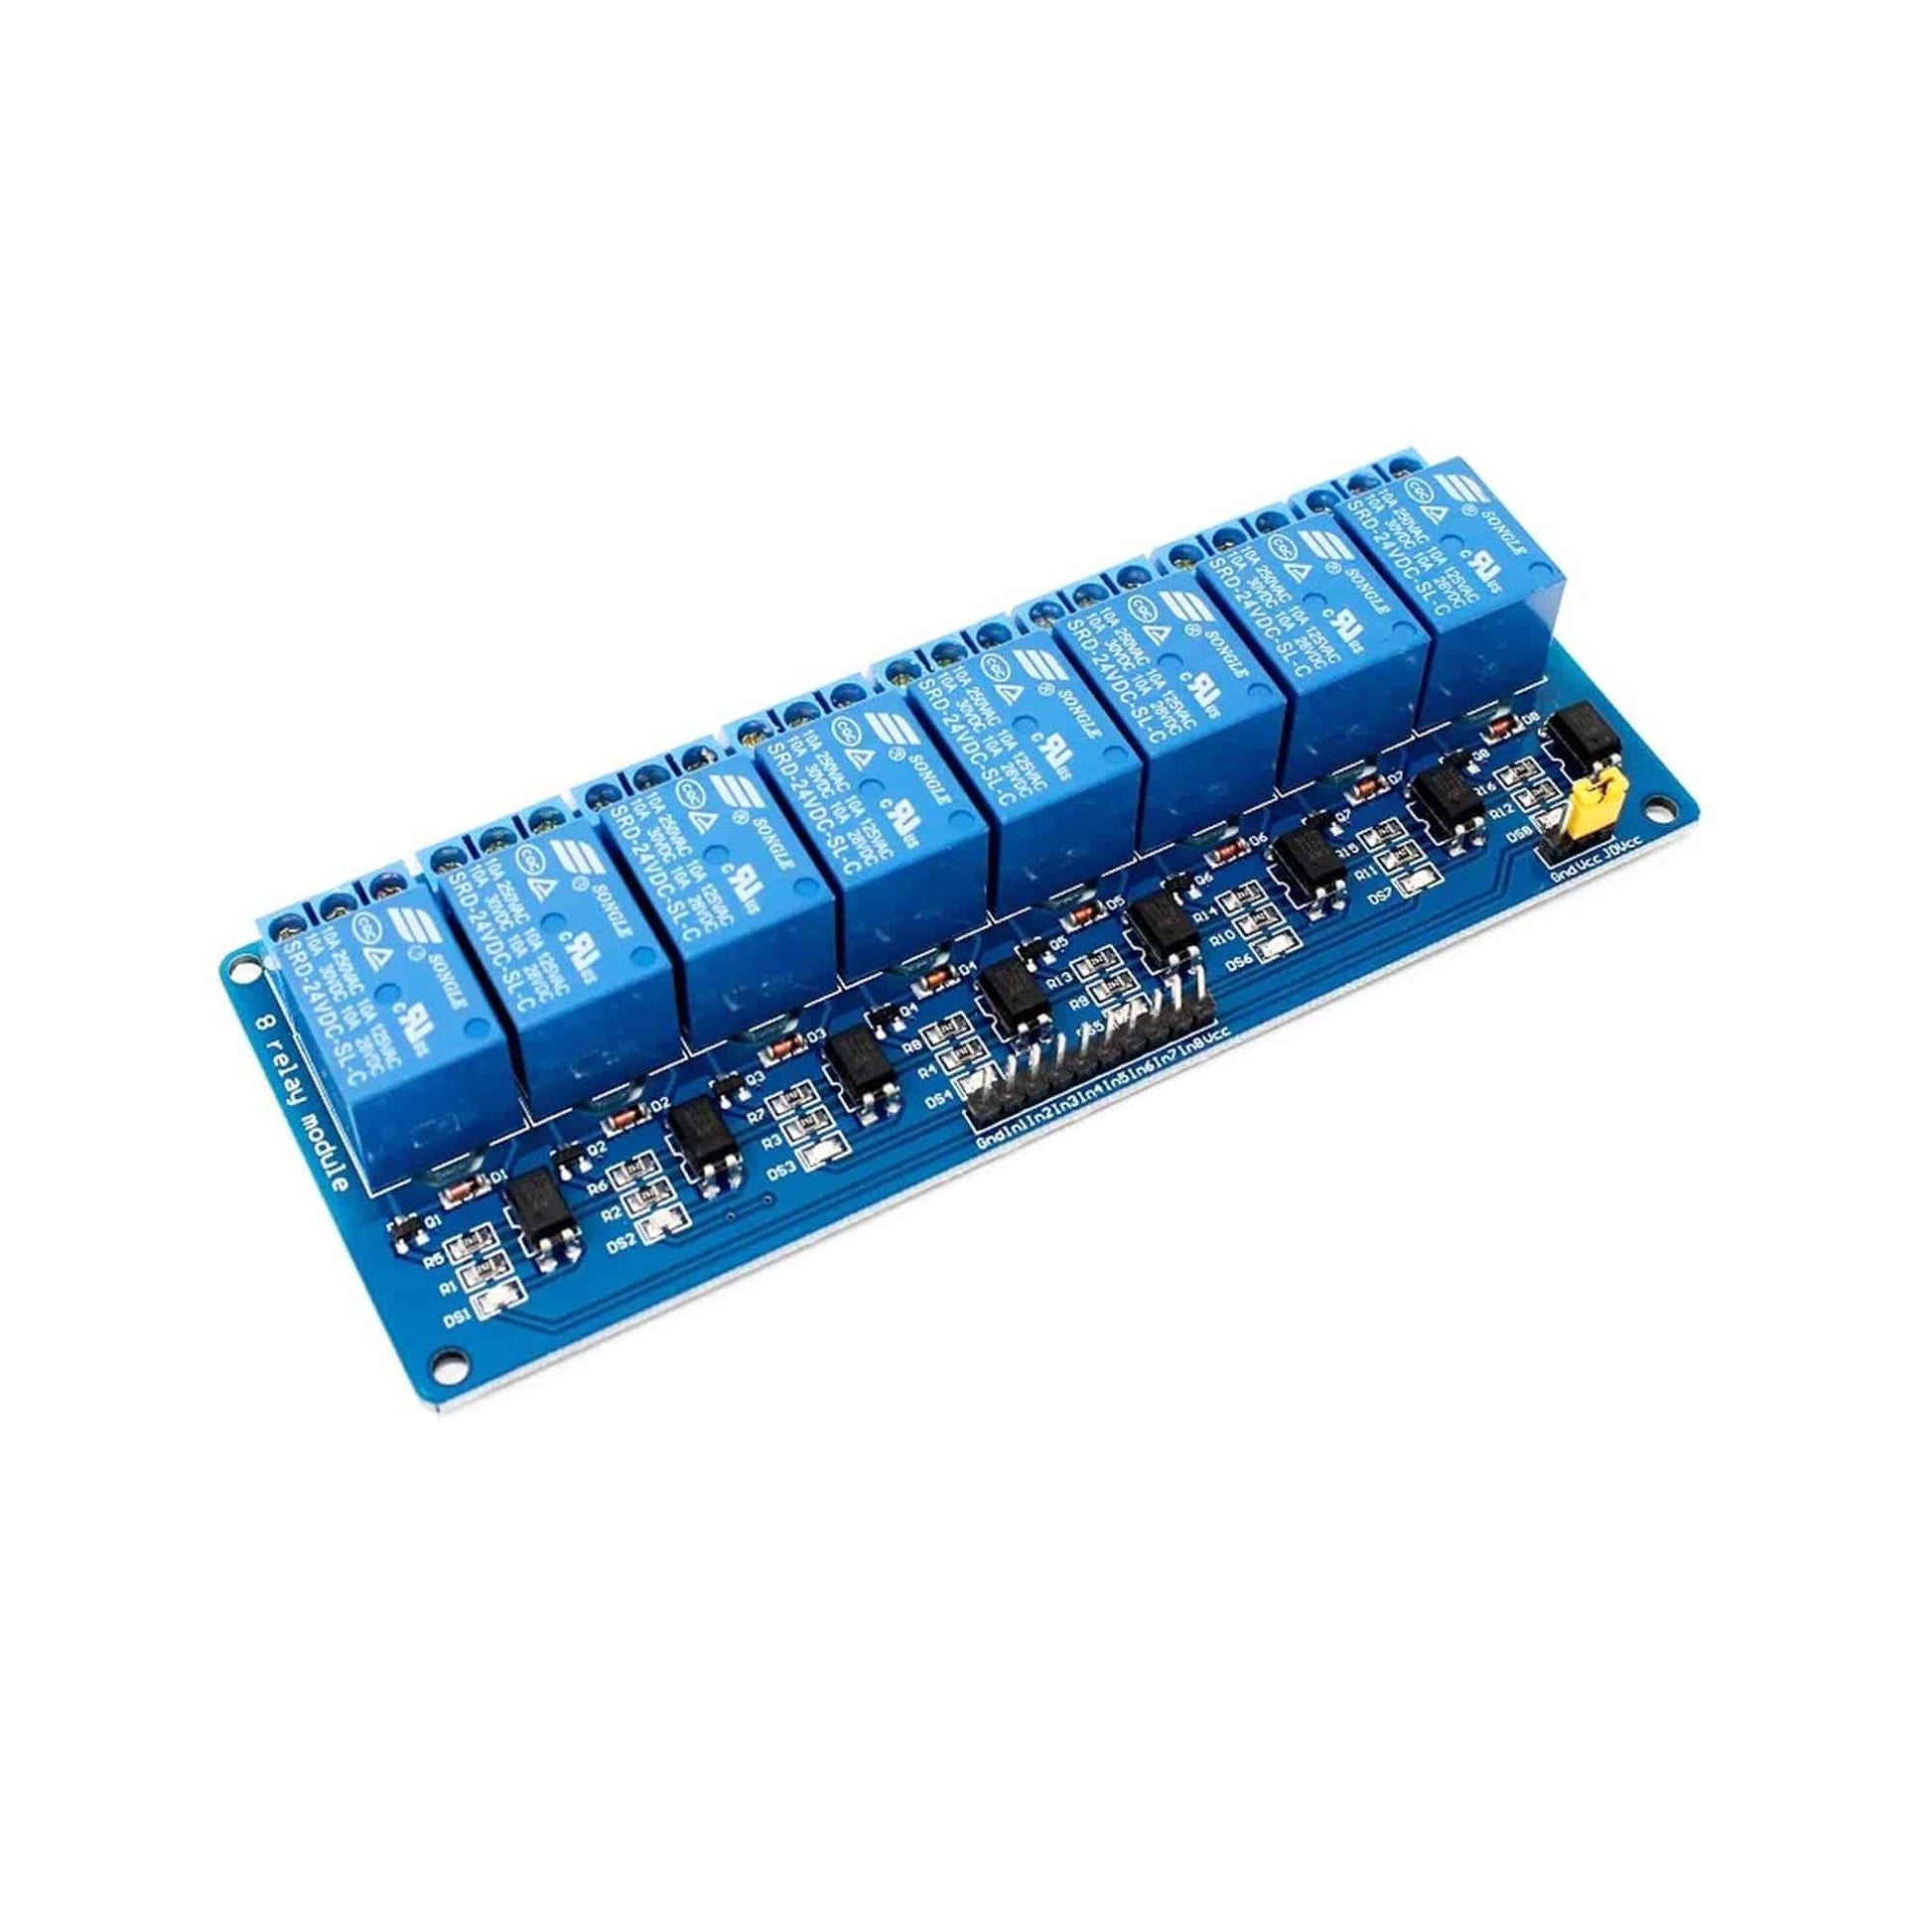 24V 8 Channel Relay Module with Optocoupler